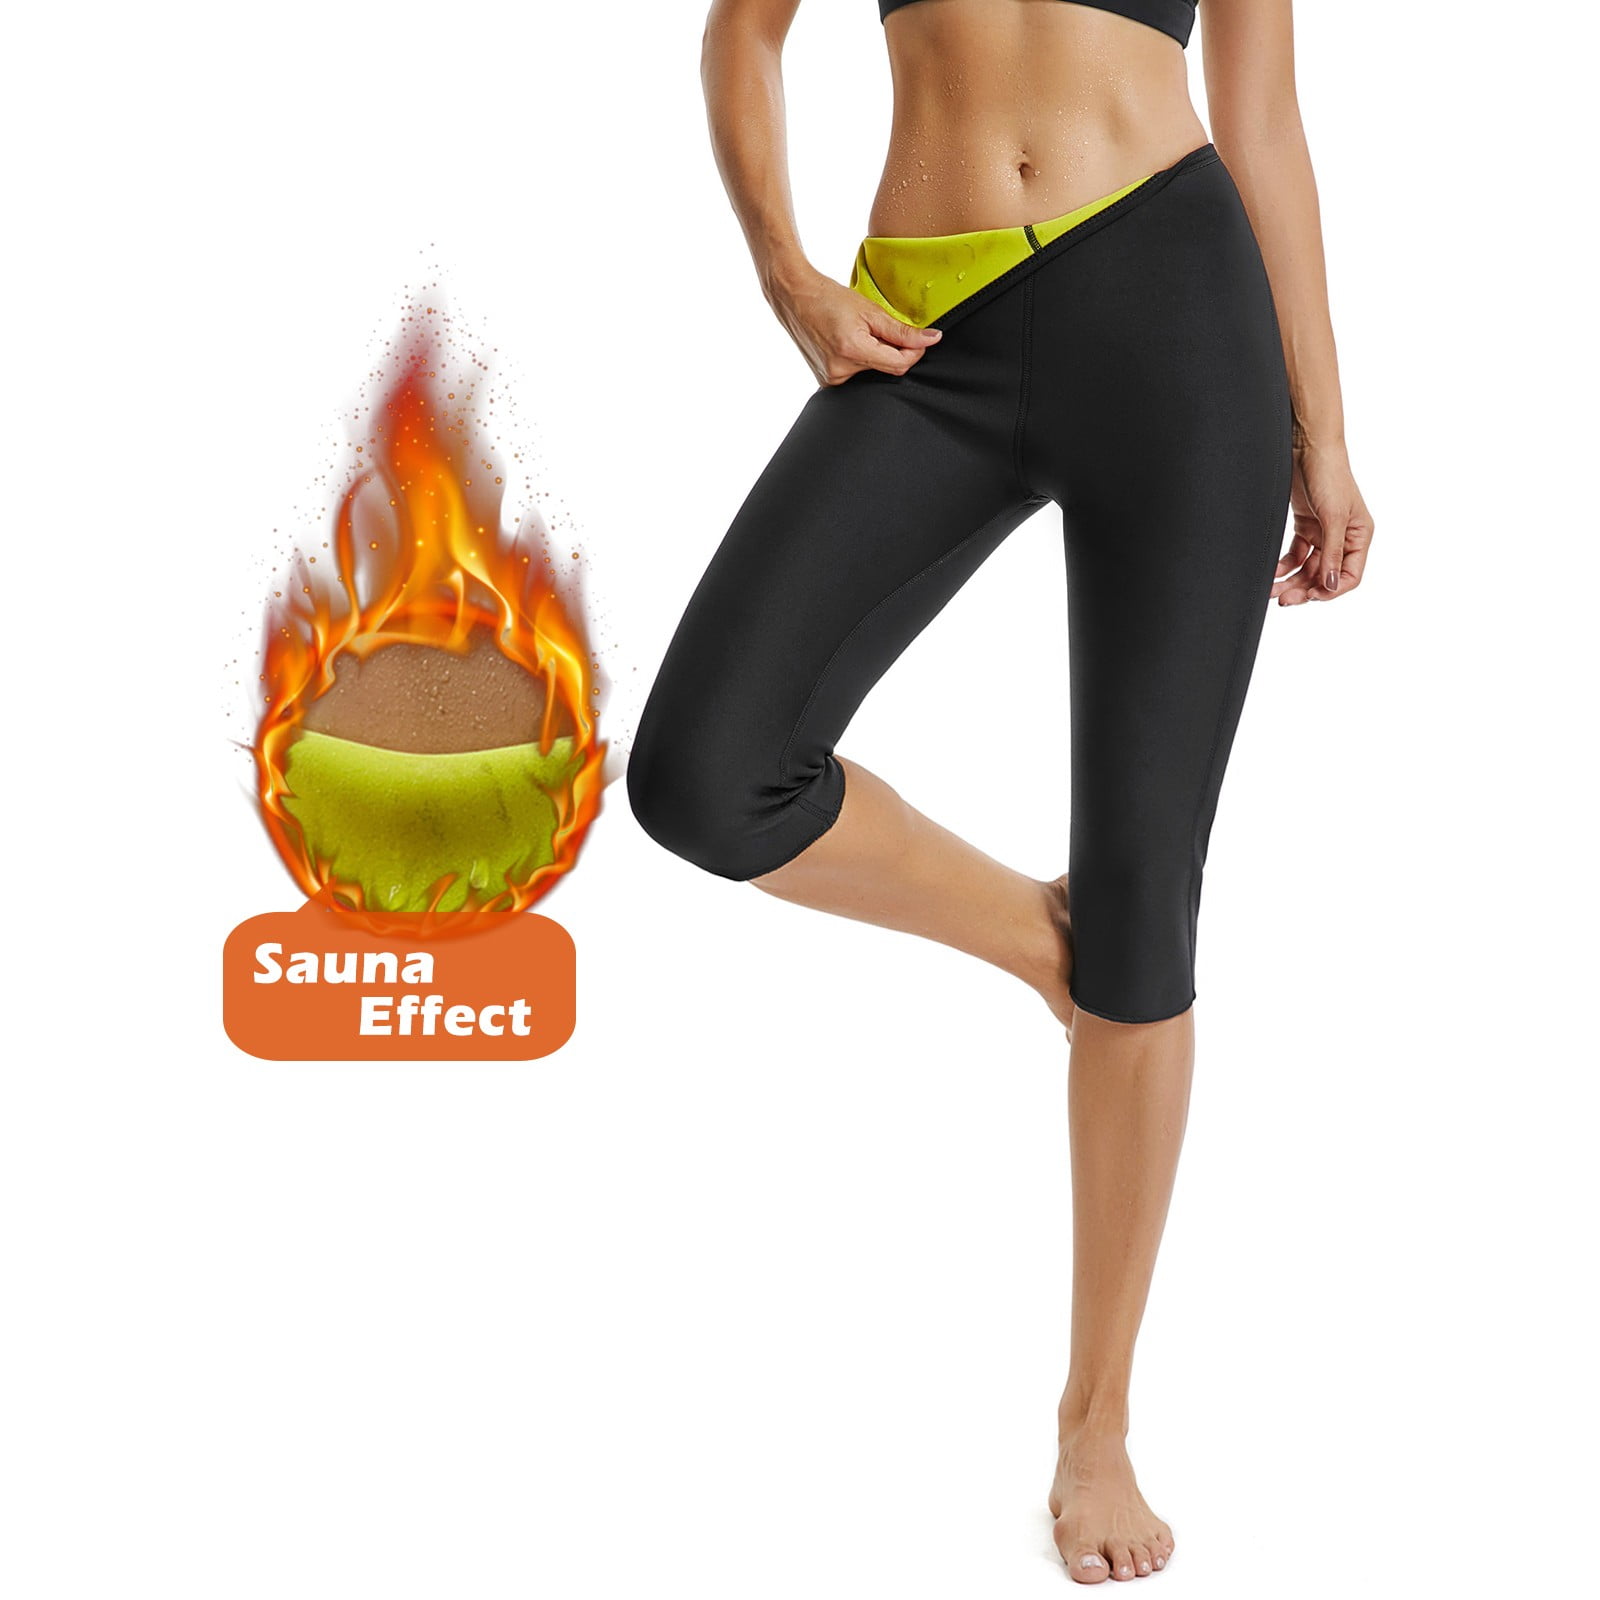 Thermal Neoprene Sauna Pants Fat Burning Leggings chiwanji Womens Sweat Pants Tightens and Helps to Reduce Excess Water